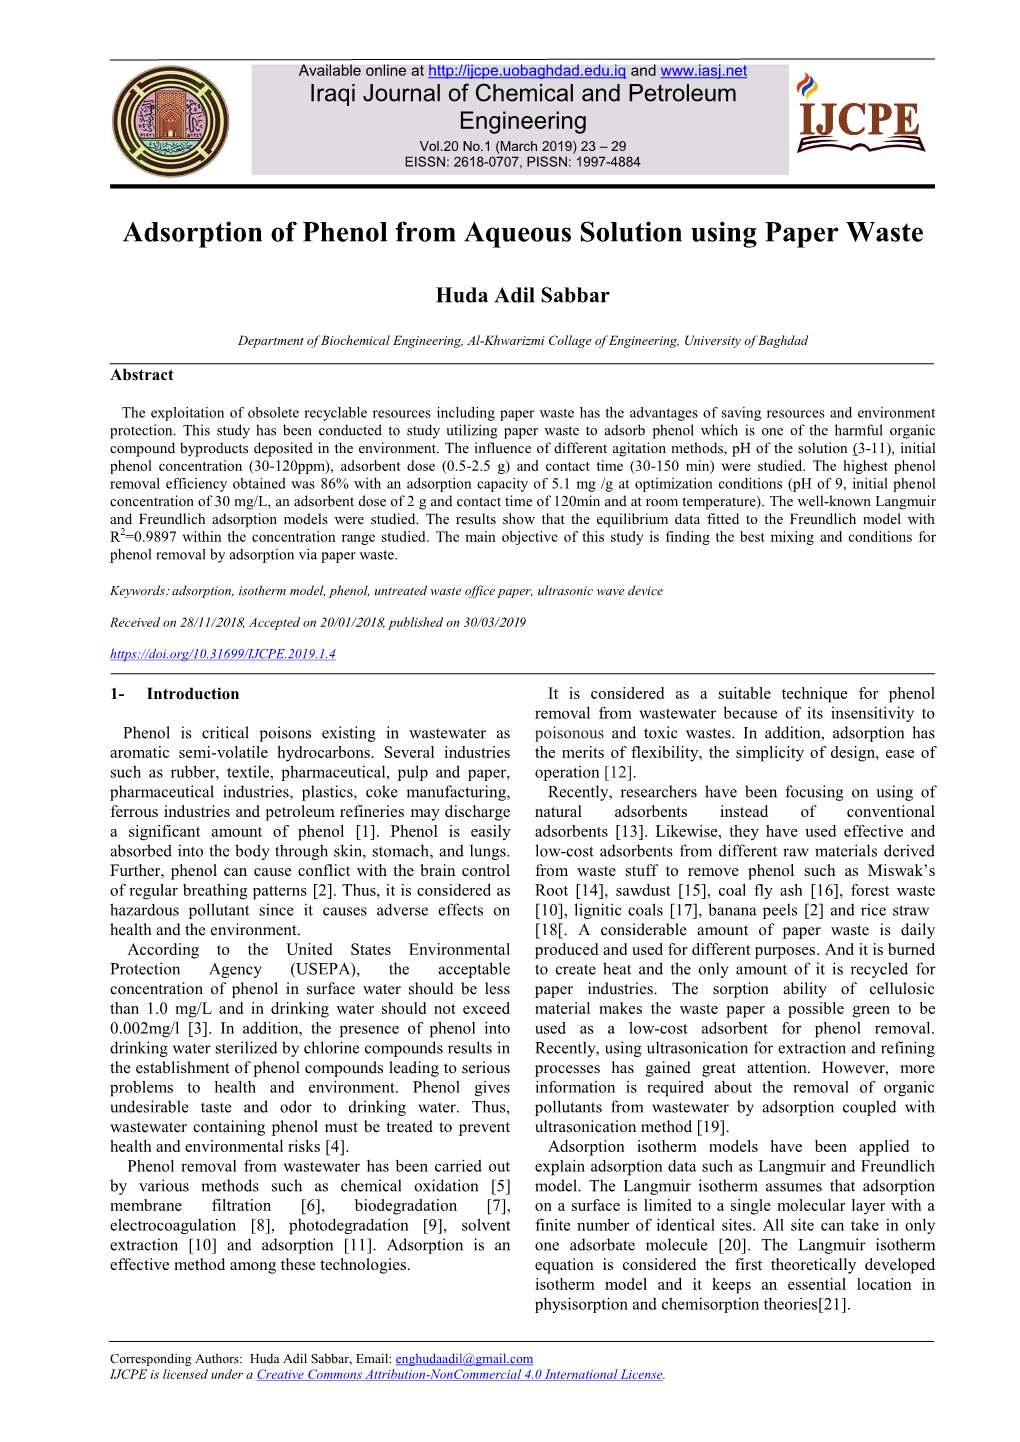 Adsorption of Phenol from Aqueous Solution Using Paper Waste